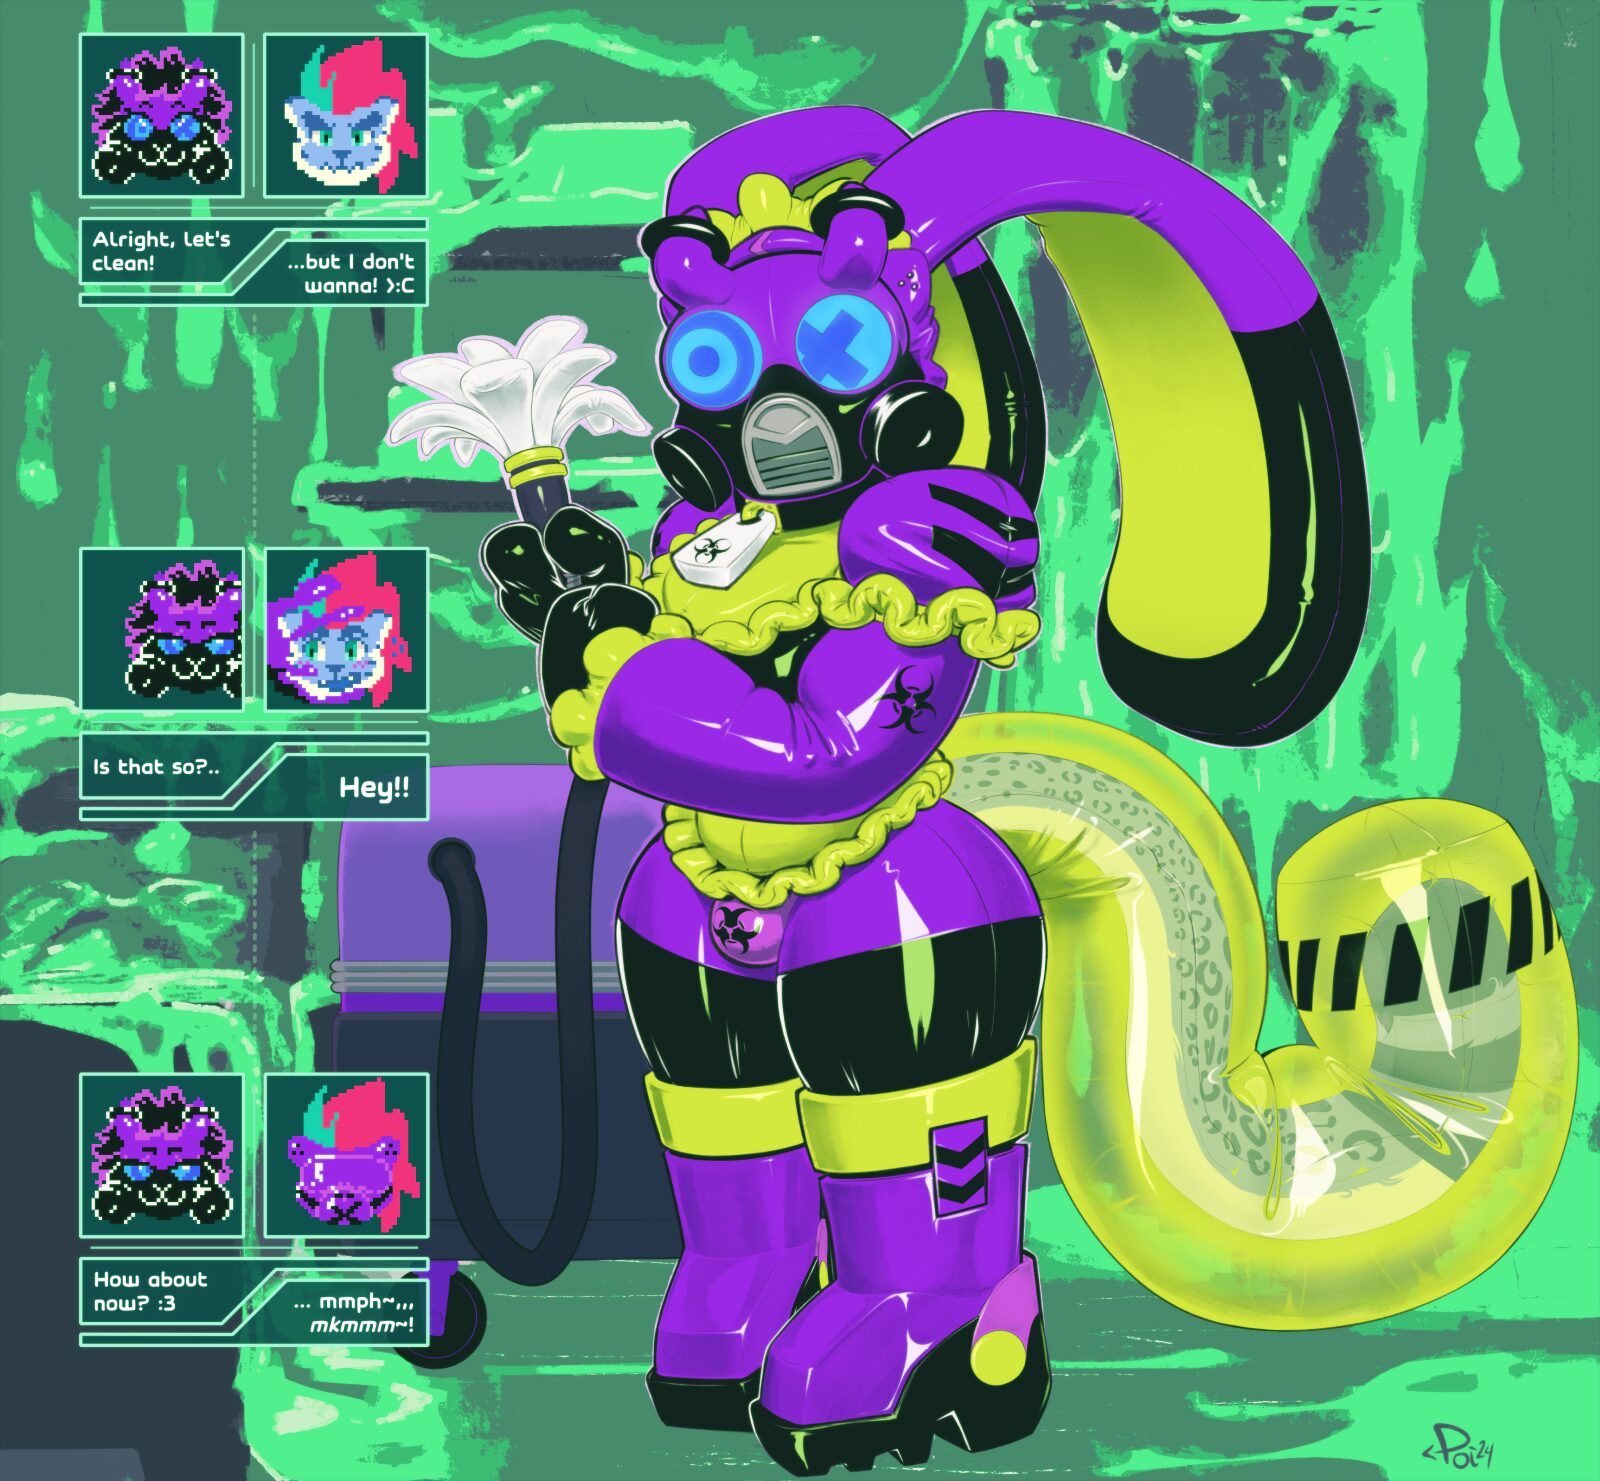 A hazmat maid themed living suit character (Ayase) themed in purple and yellow-green wields a feather duster (composed of inflated latex "feathers") and stands in a green tinted bedroom with green glowing goop all over the place. Through the translucent latex of the tail, one can see the snow leopard tail of the occupant of the suit (Pepper). A conversation between the two is depicted to the left of the image. Ayase: "Alright, let's clean!" Pepper: "...but I don't wanna >:(" Ayase (whose avatar appears to be stretching into Pepper's avatar, coating him in a purple goop): "Is that so?" Pepper: "Hey!!" Ayase: "How about now? :3" Pepper (whose avatar is now wearing a latex blindfold and gag): "... mmph~,,, mkmmm~!"